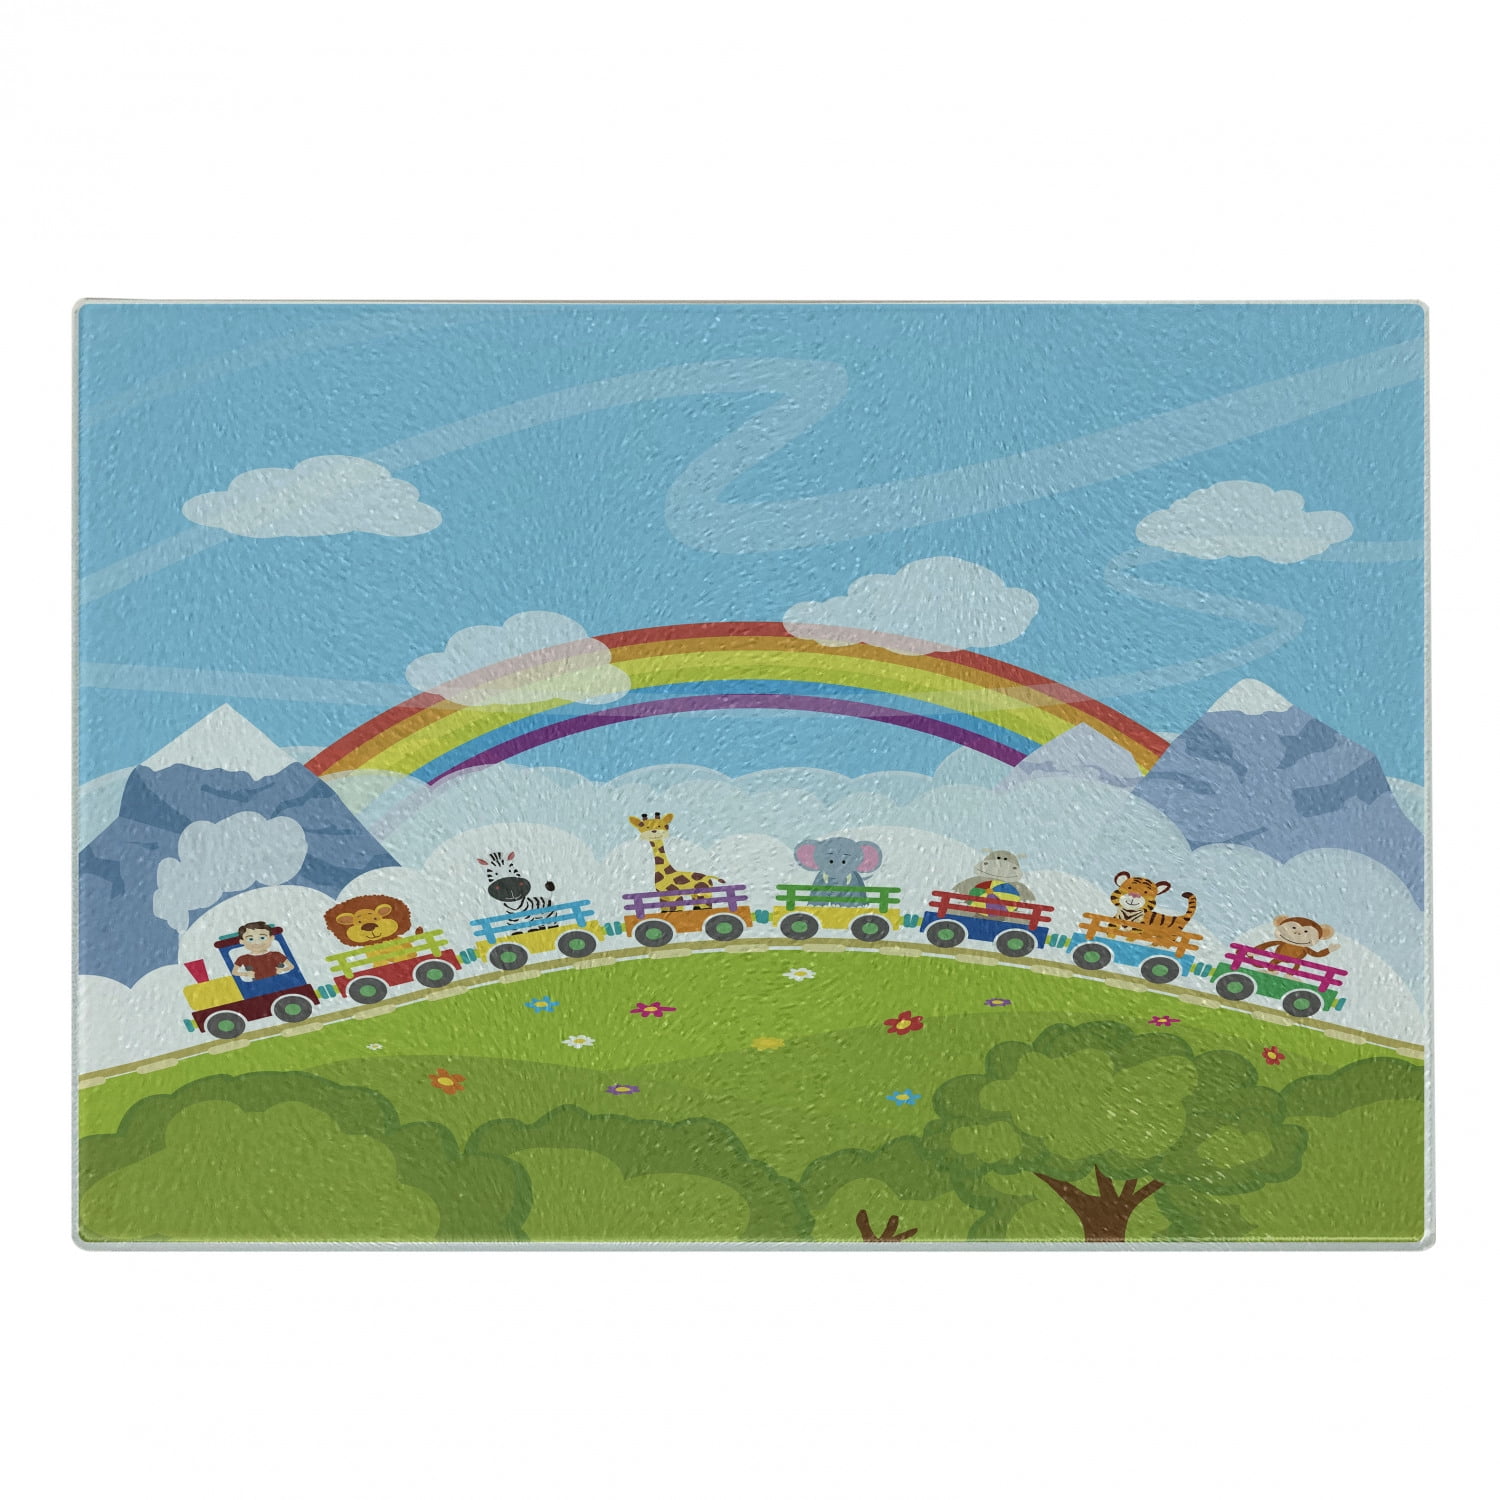 Cartoon Cutting Board, Railway Train with Various Animals and a Rainbow  Mountains Clouds Trees, Decorative Tempered Glass Cutting and Serving  Board, Large Size, Multicolor, by Ambesonne 